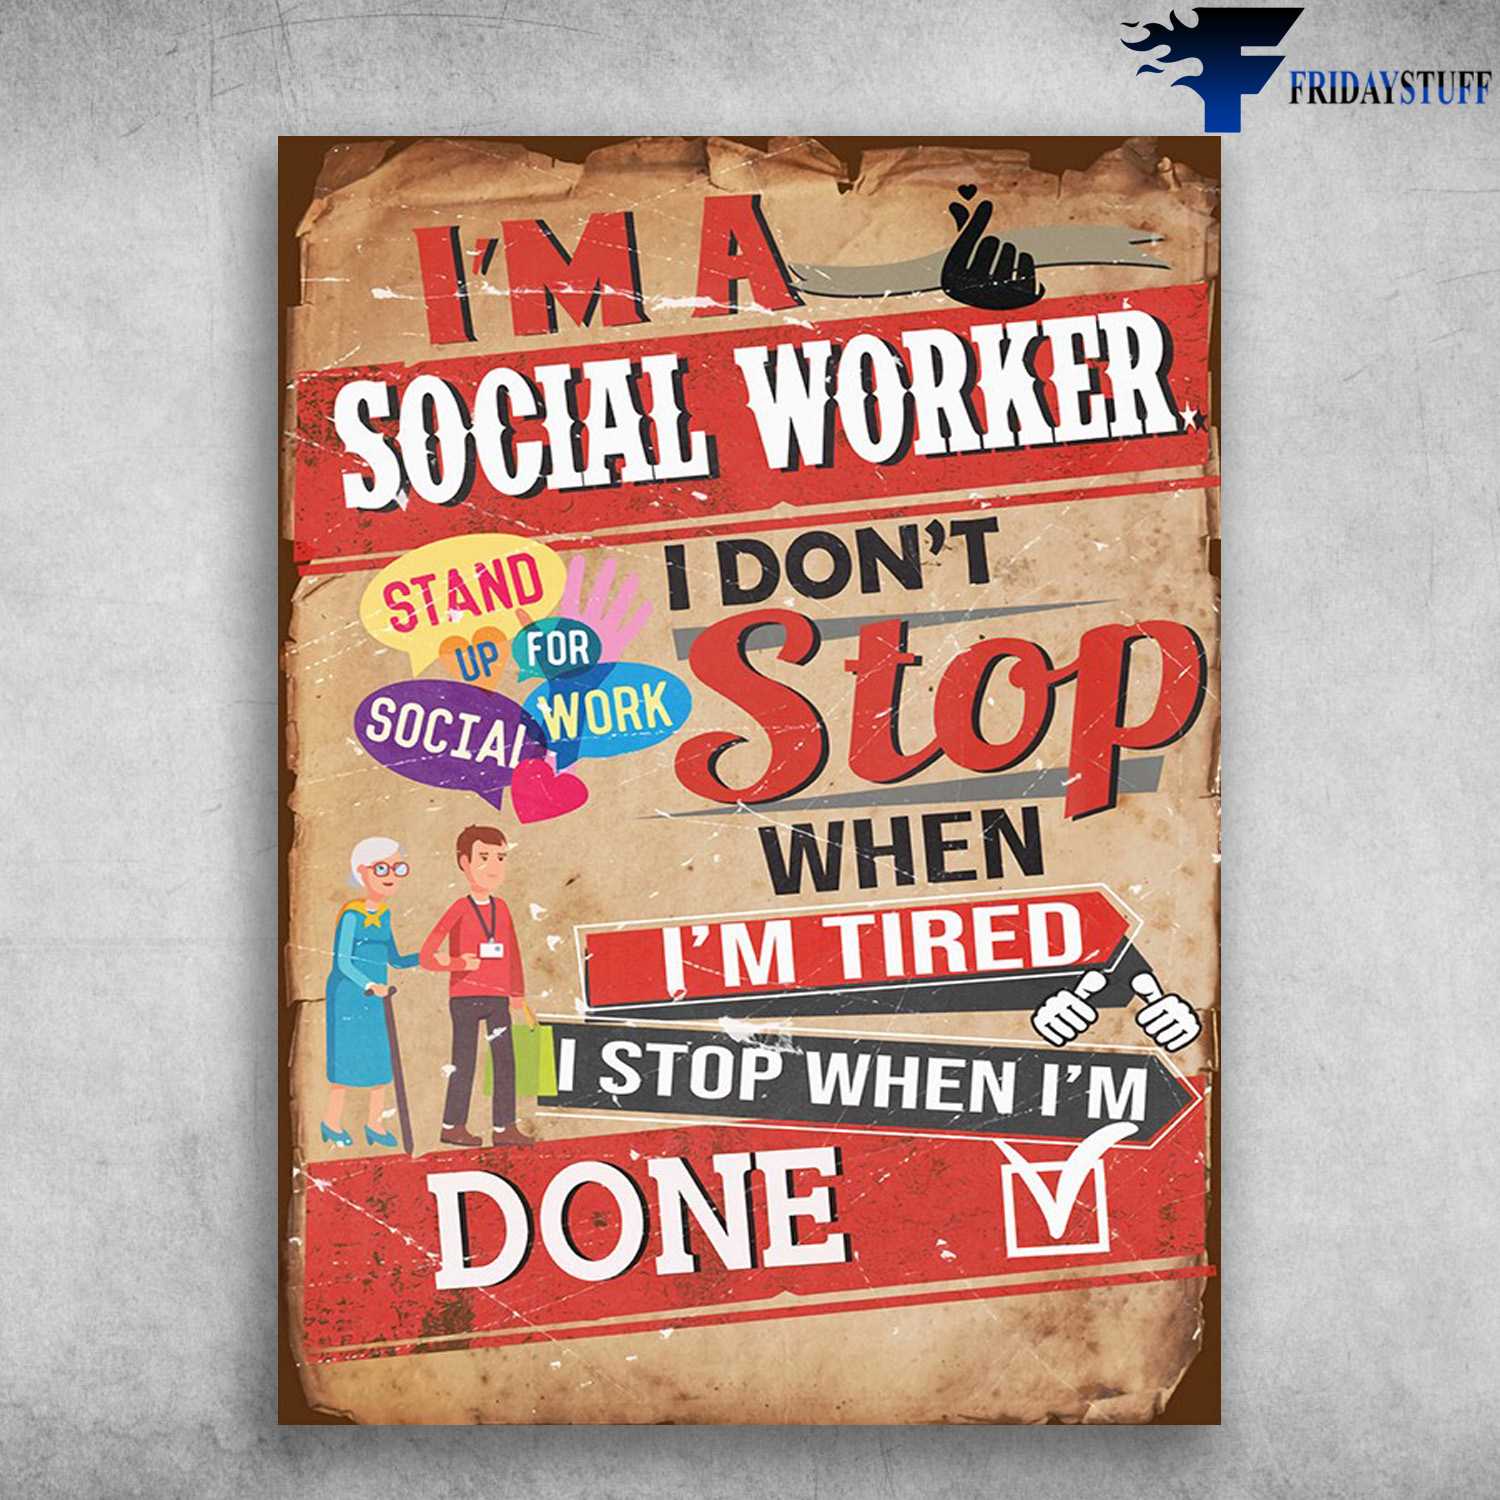 Social Worker - I'm Social Worker, I Don't Stop, When I'm Tired, I Stop When I'm Done, Stand Up For Social Work